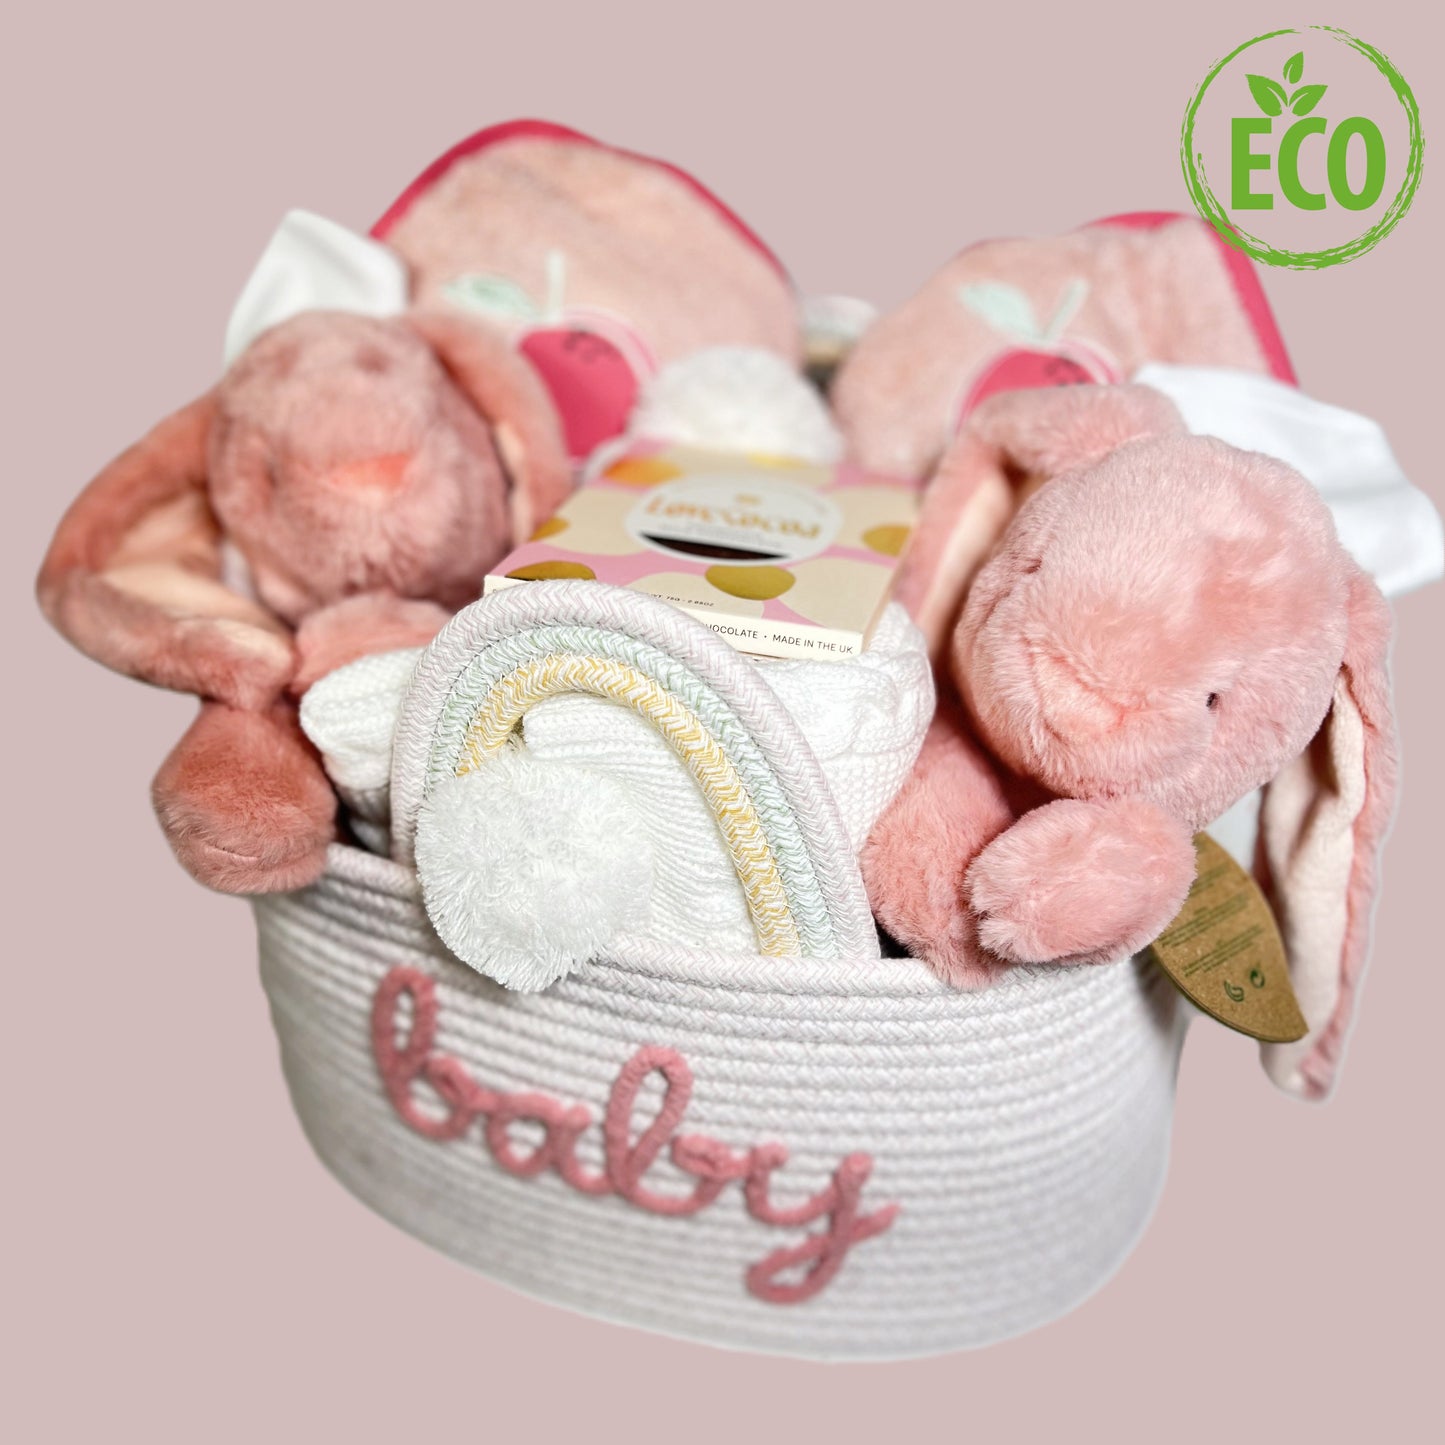 New Baby Girl Hamper Baskets - Double Delight Twin Girls Gifts, Eco Friendly, Ebba Bunny Soft Toy, White Pompom Baby Blanket, Rope Nursery Caddy.